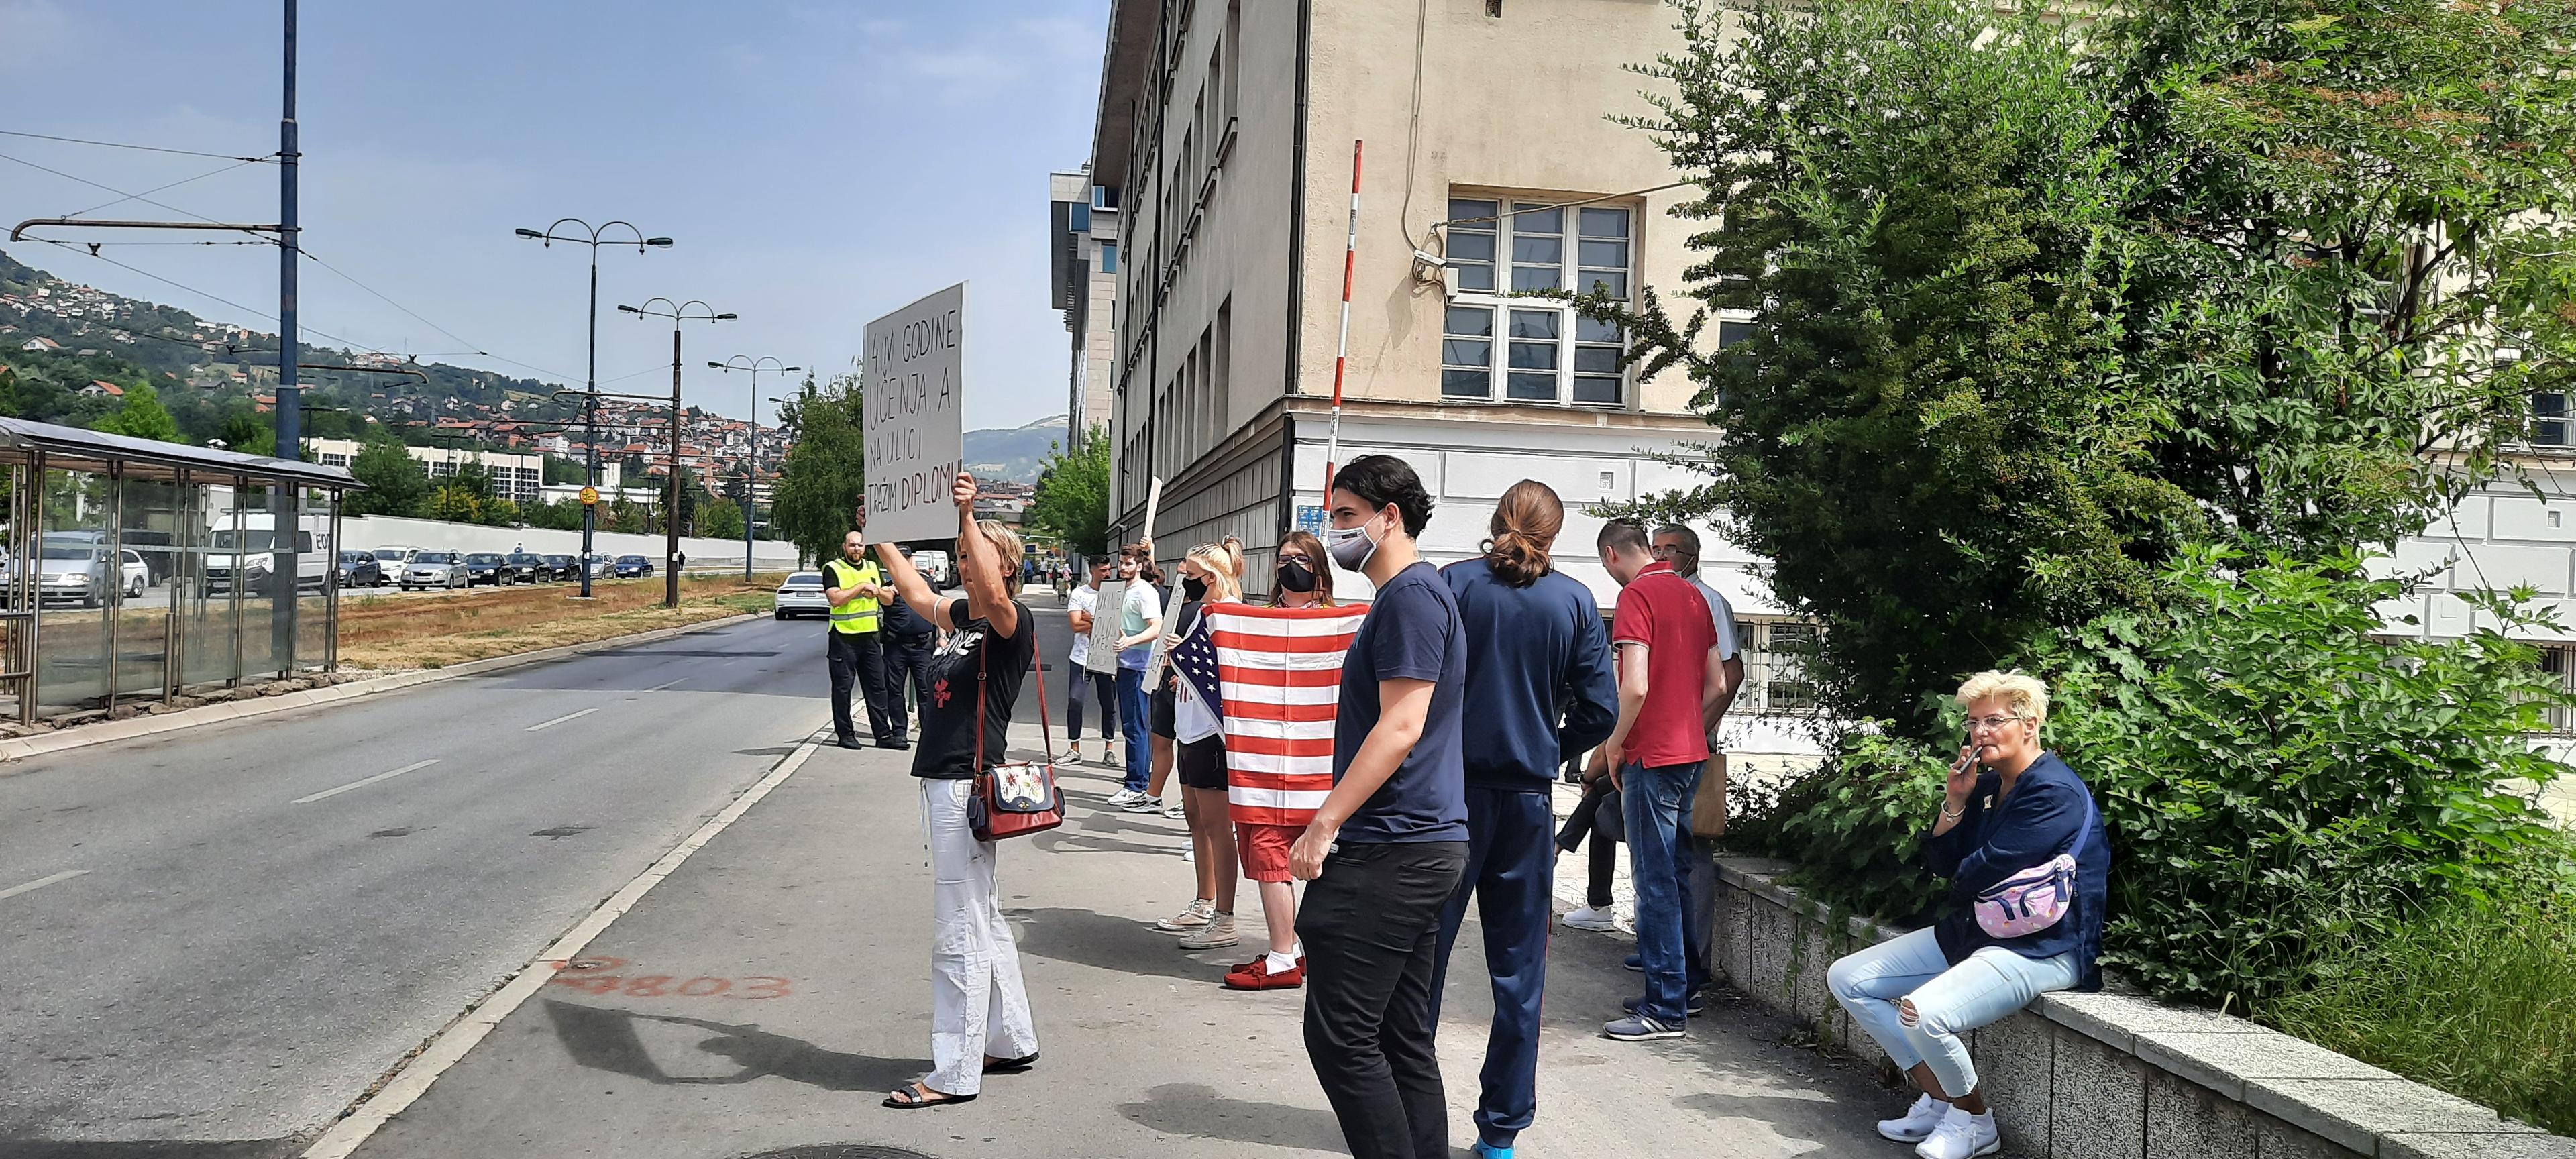 Students of the American University in B&H: We want diplomas and annulment of American citizenship for Prcić